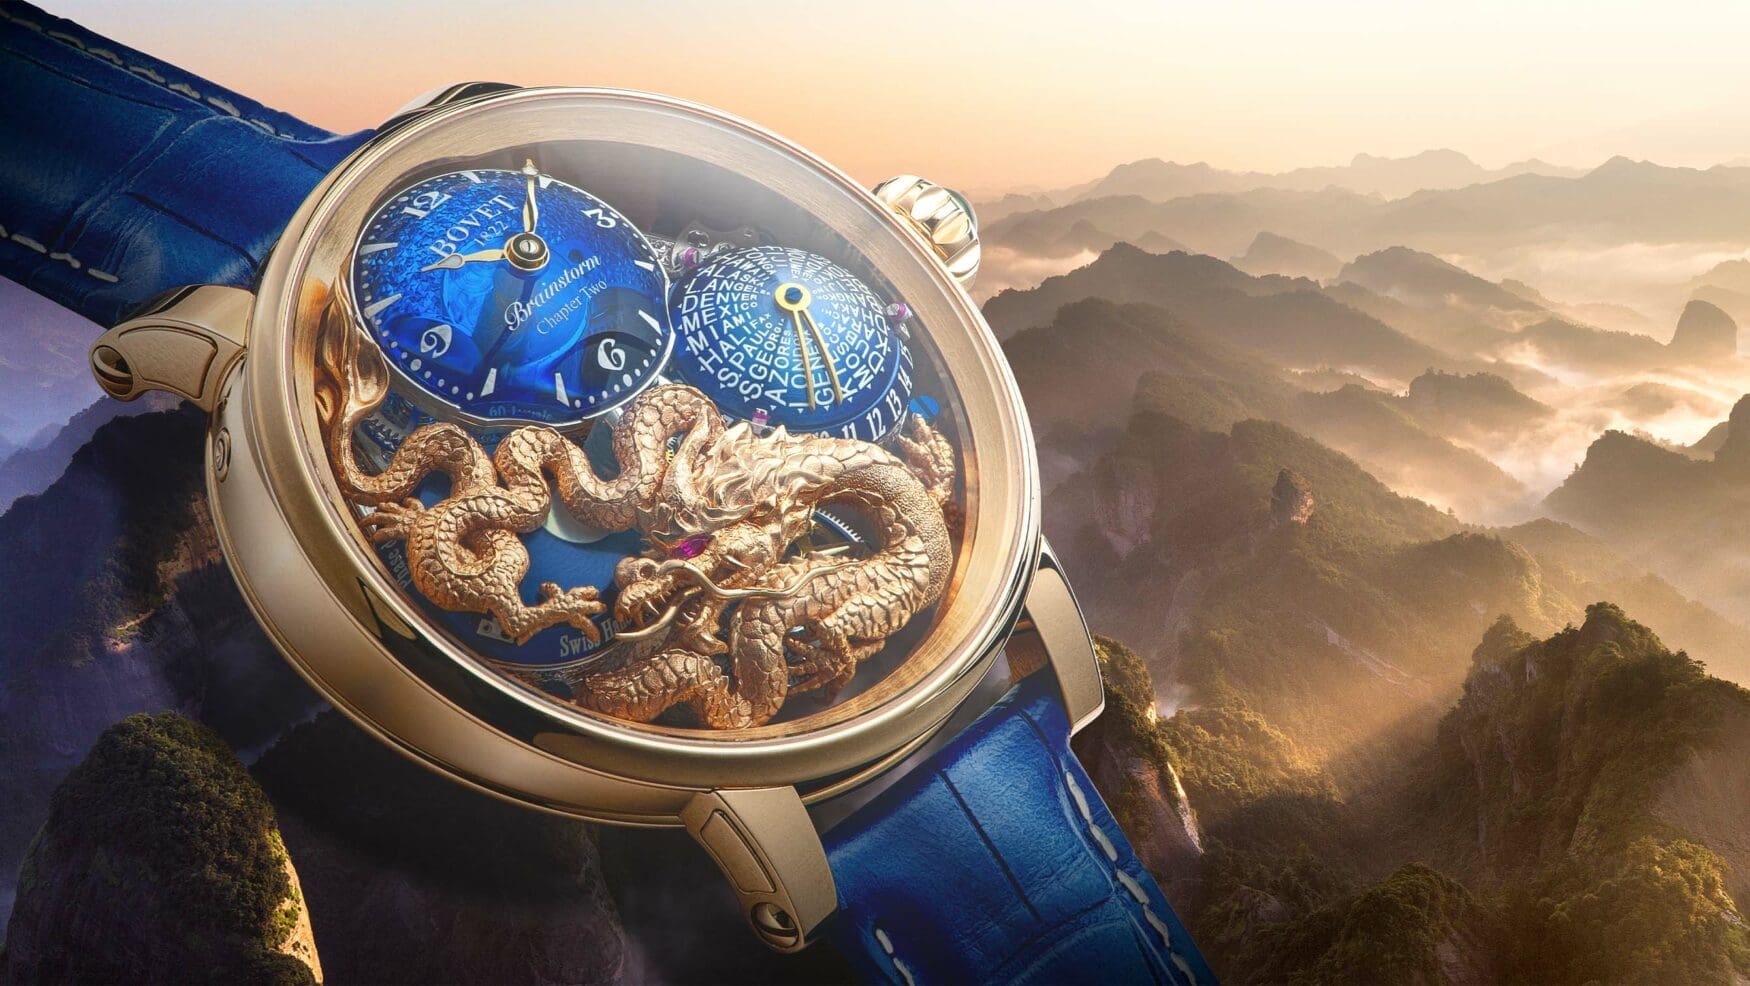 The Bovet Récital 26 Chapter 2 Golden Dragon “paints the dragon and dots the eyes”